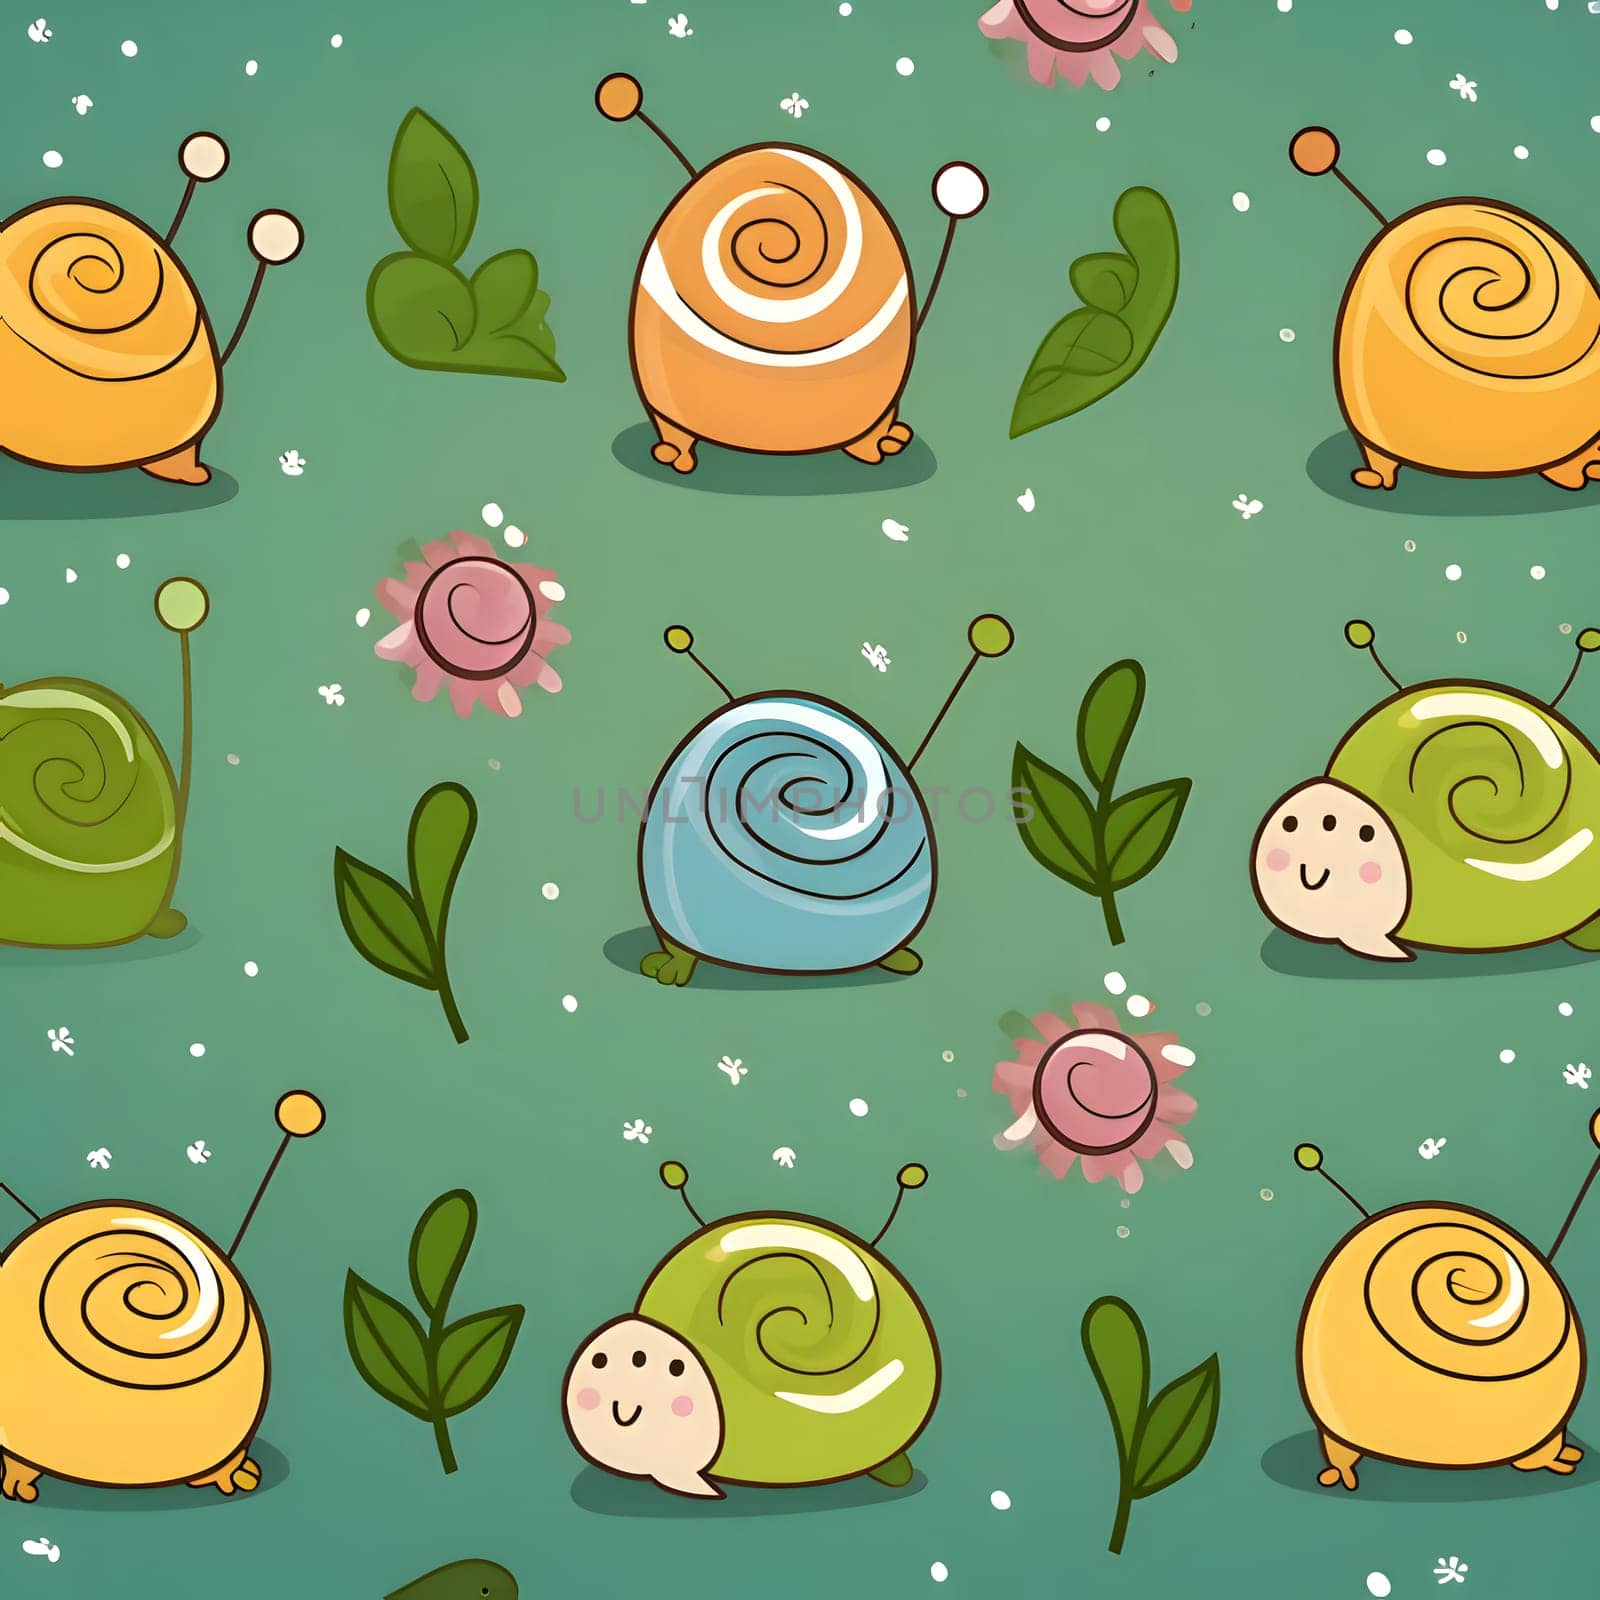 Patterns and banners backgrounds: Seamless pattern with cute cartoon snails. Vector illustration.